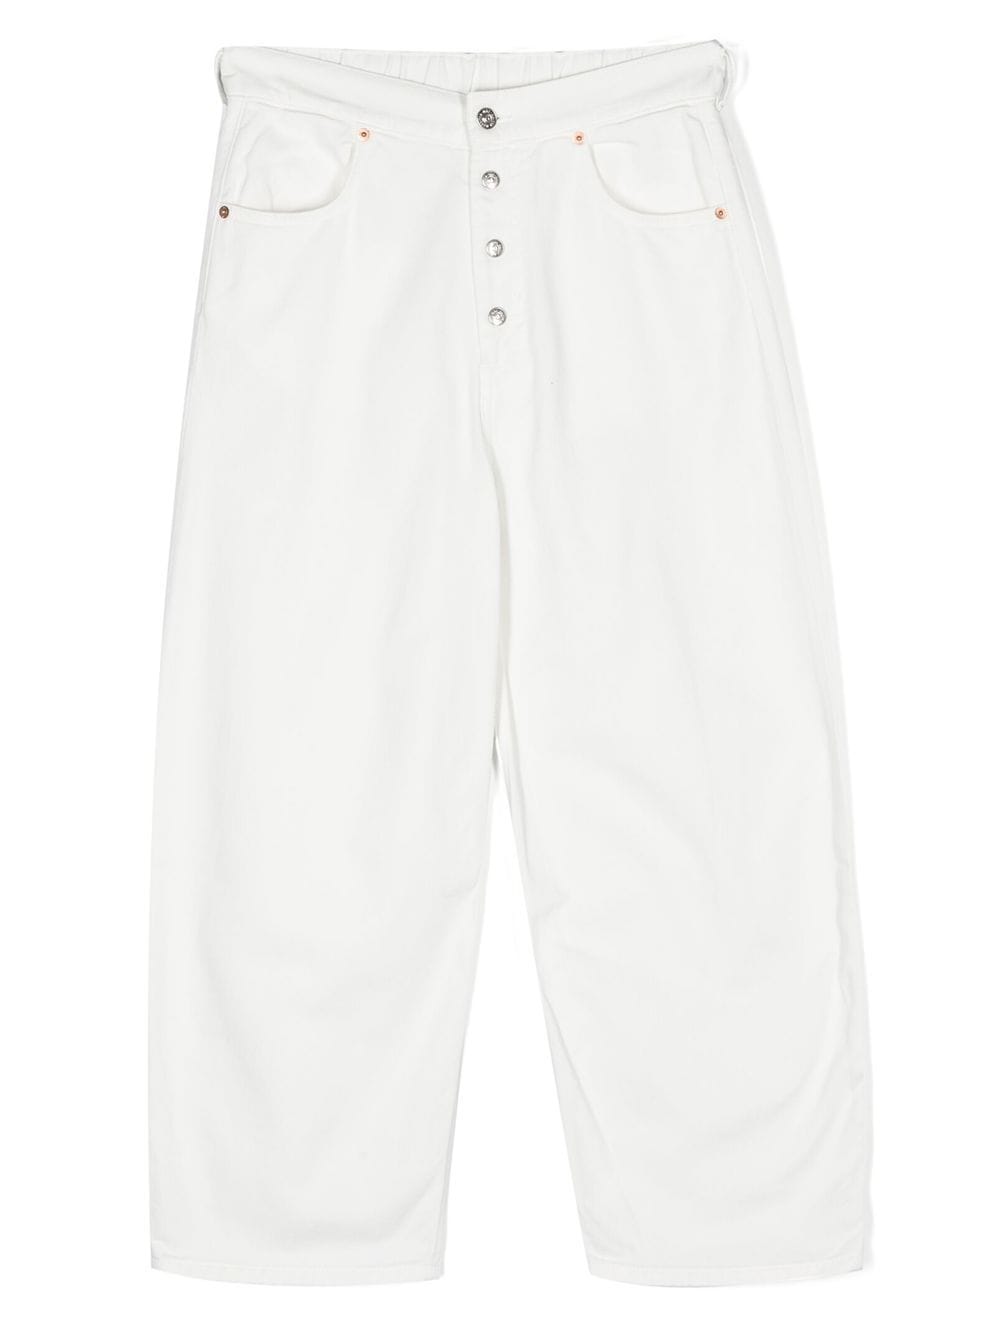 MM6 Maison Margiela Kids exposed-buttons straight leg jeans - White von MM6 Maison Margiela Kids